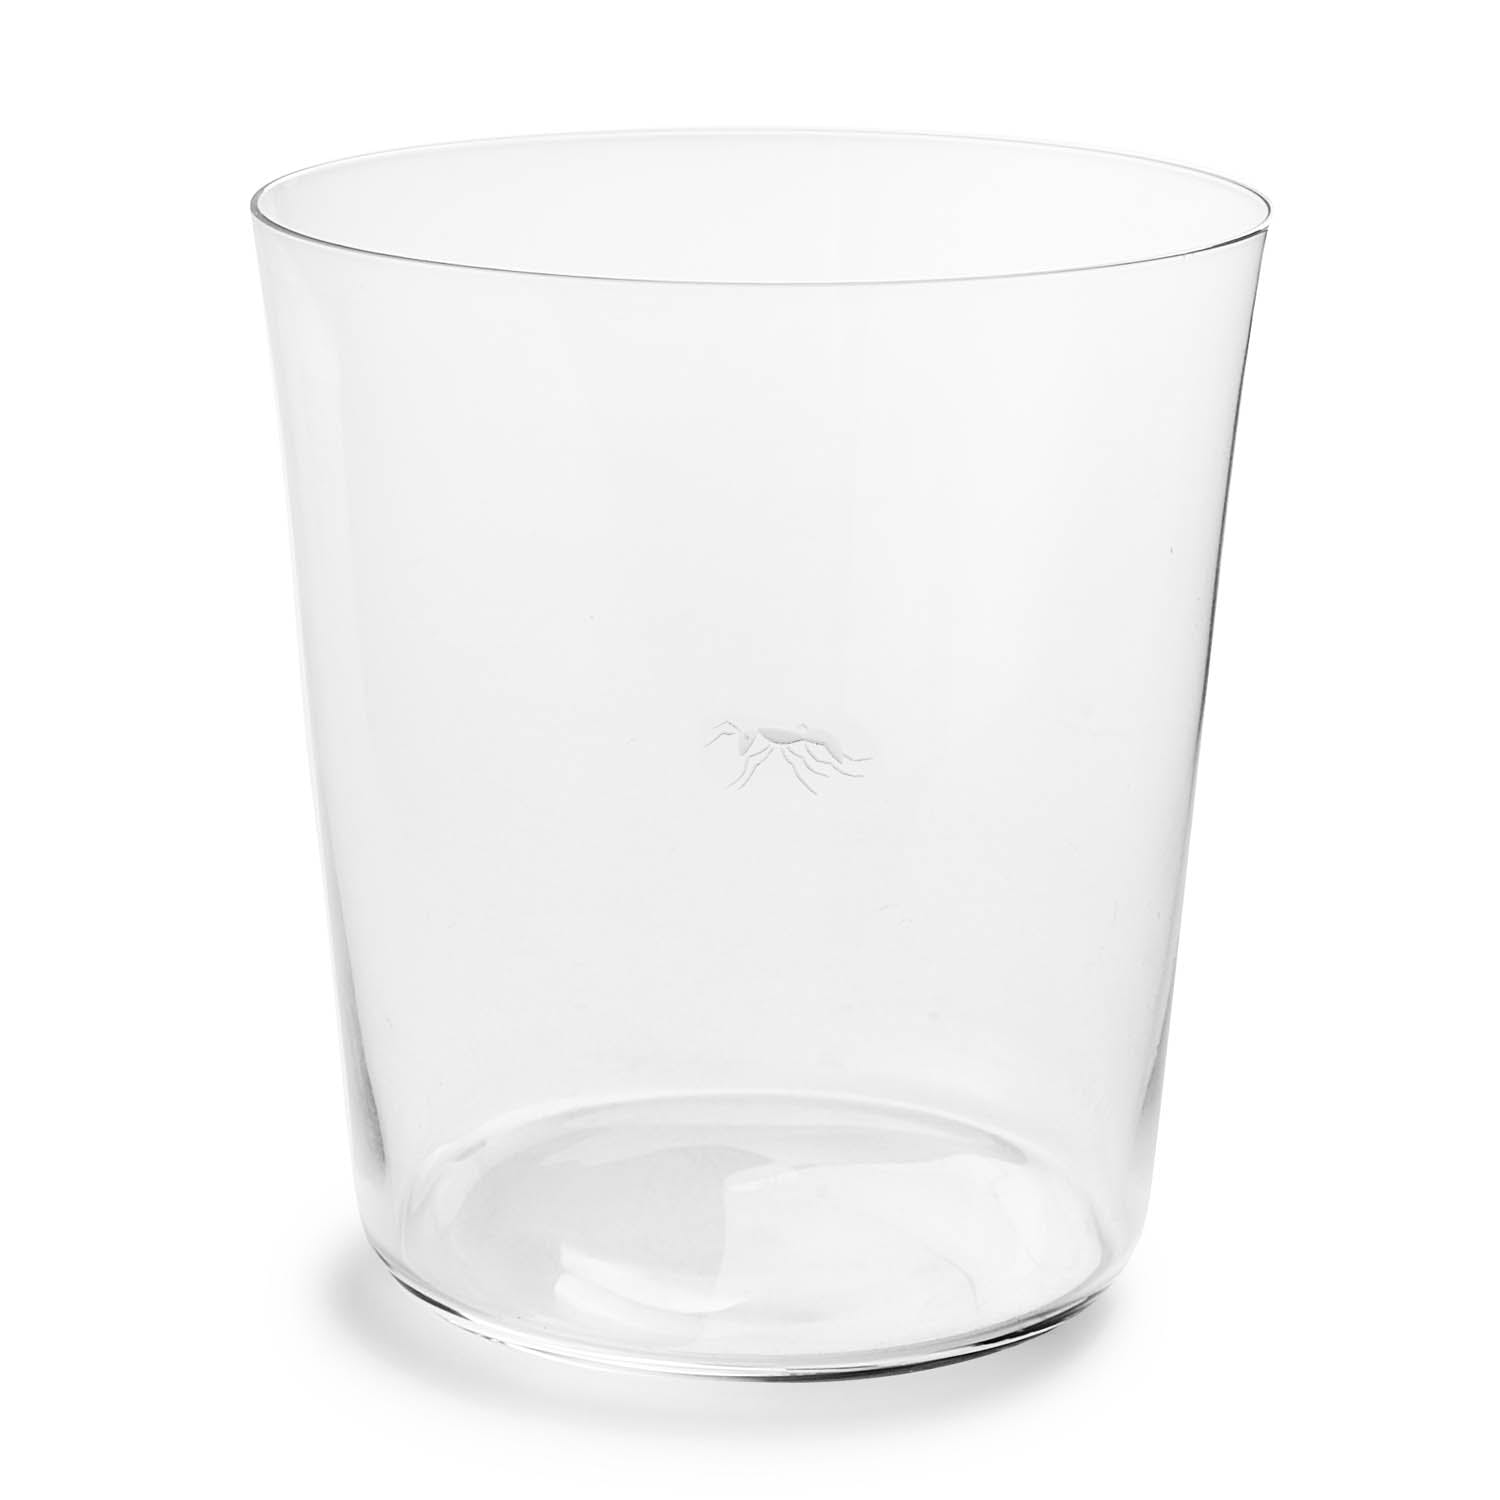 Clear glass tumbler on a white background, featuring subtle logo.